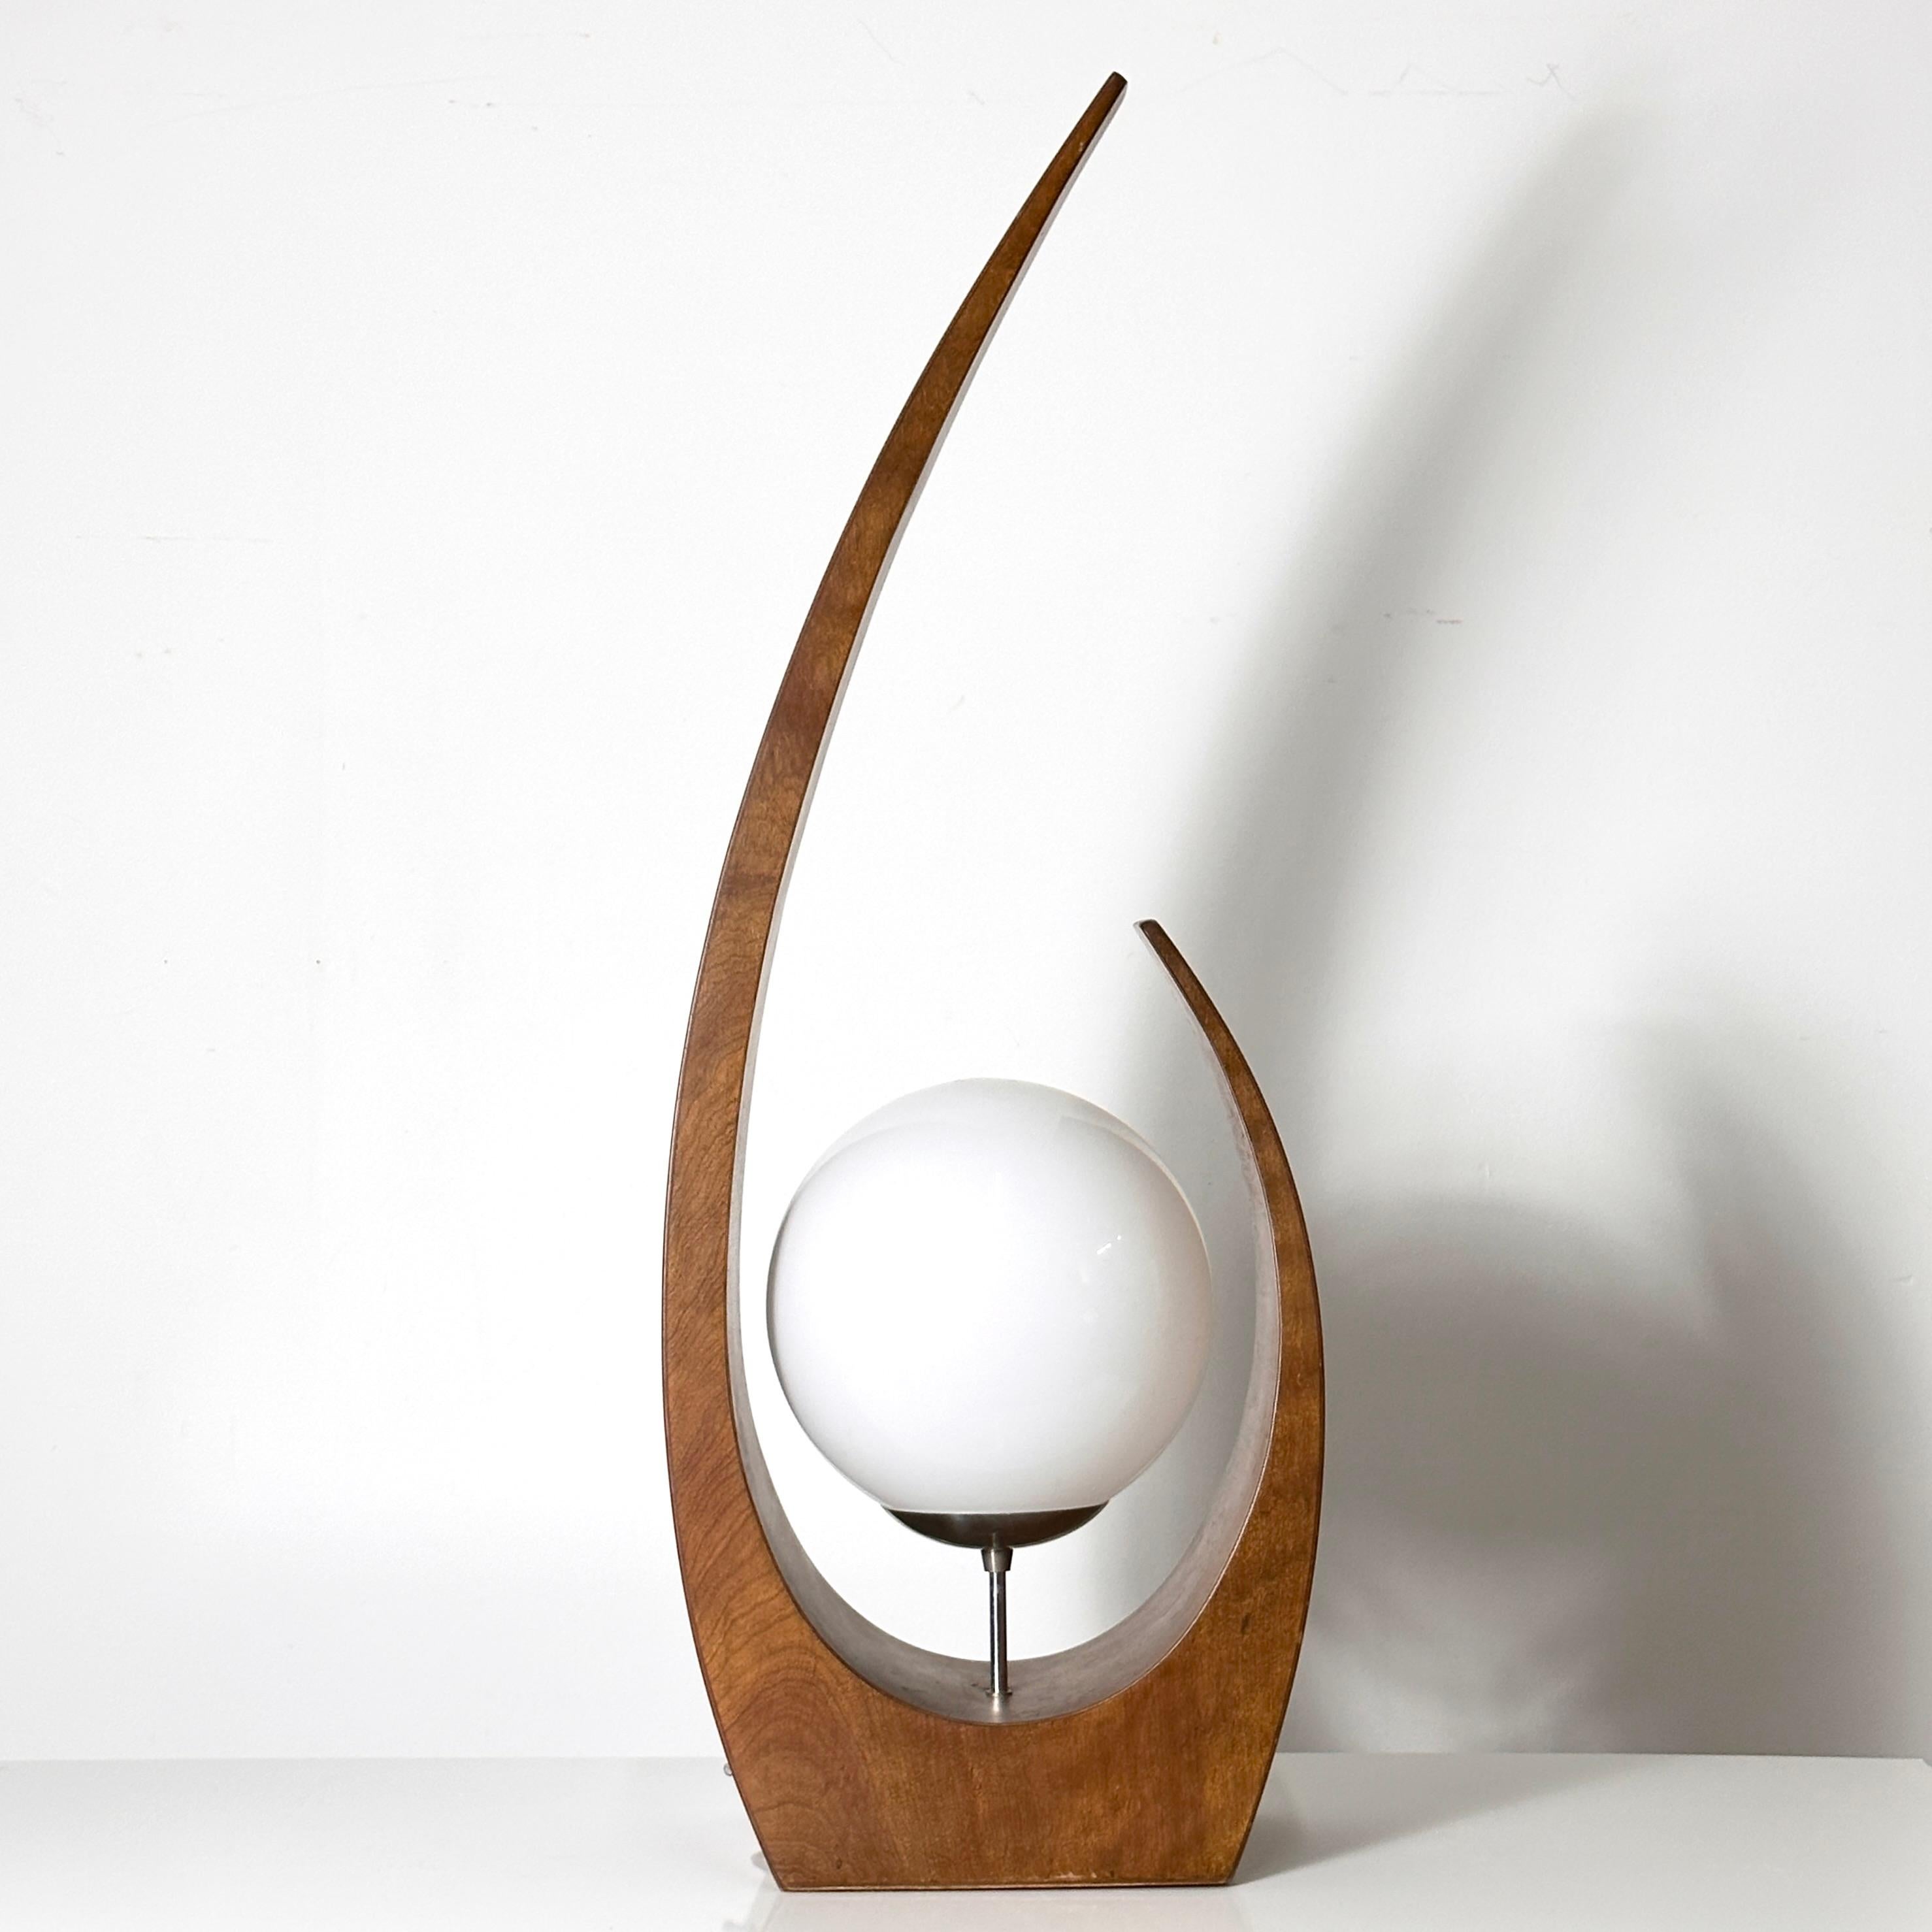 Rare Mid Century Modern table lamp designed by Jack Haywood for Modeline of California circa 1970s.
Sculptural walnut plywood base with center floating white glass globe shade.